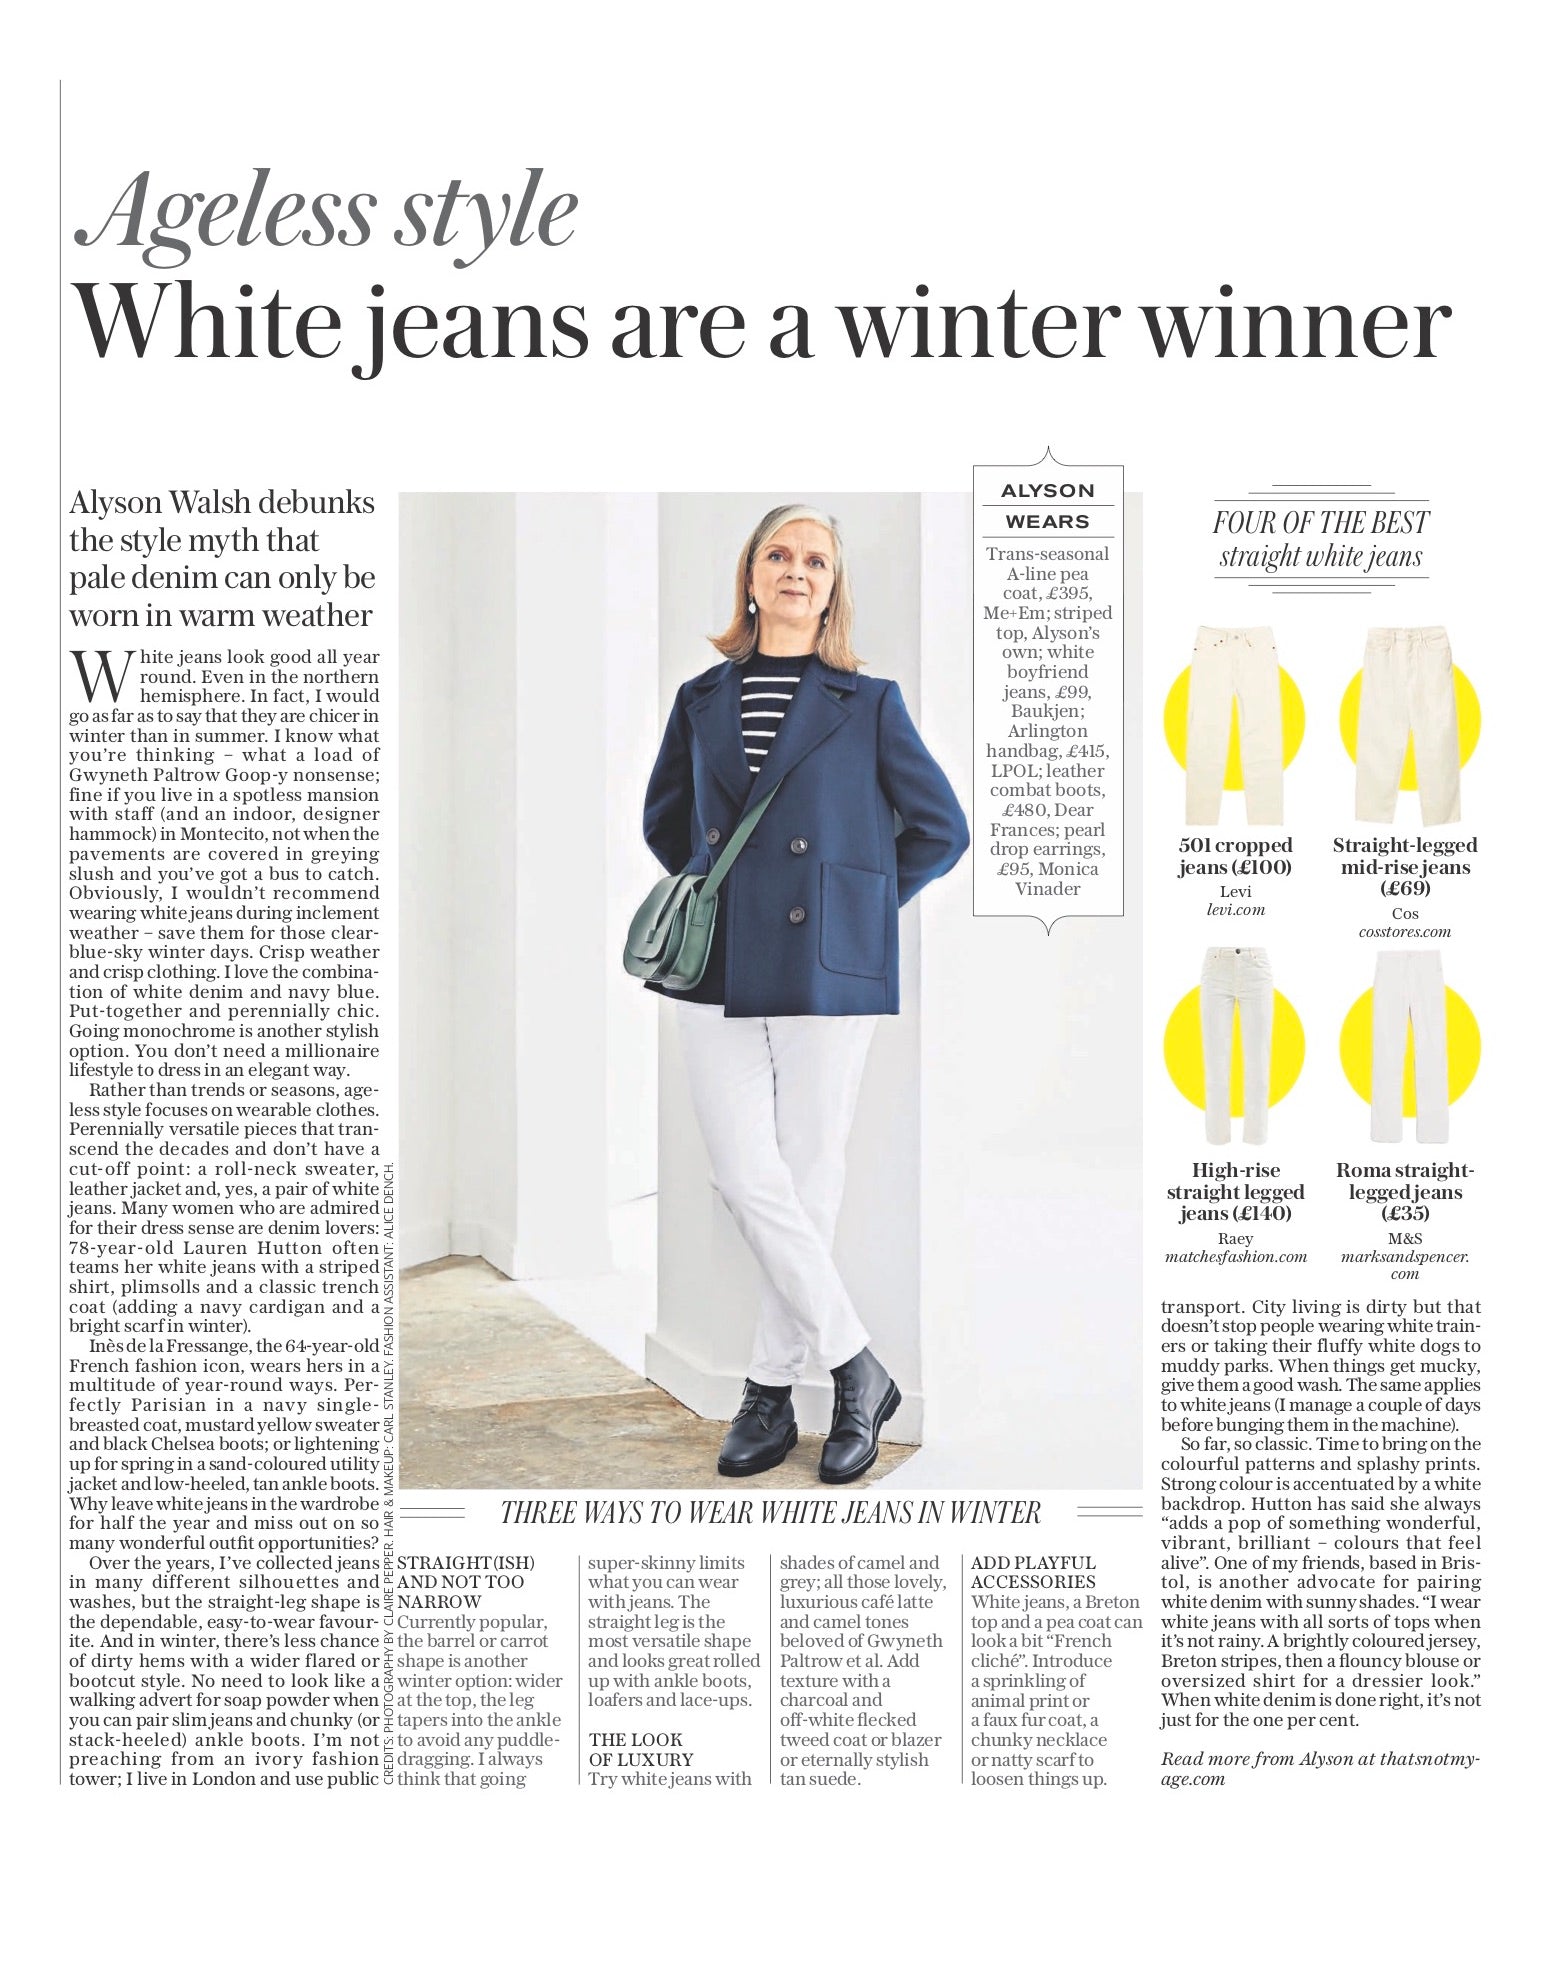 Alyson Walsh on Ageless Style